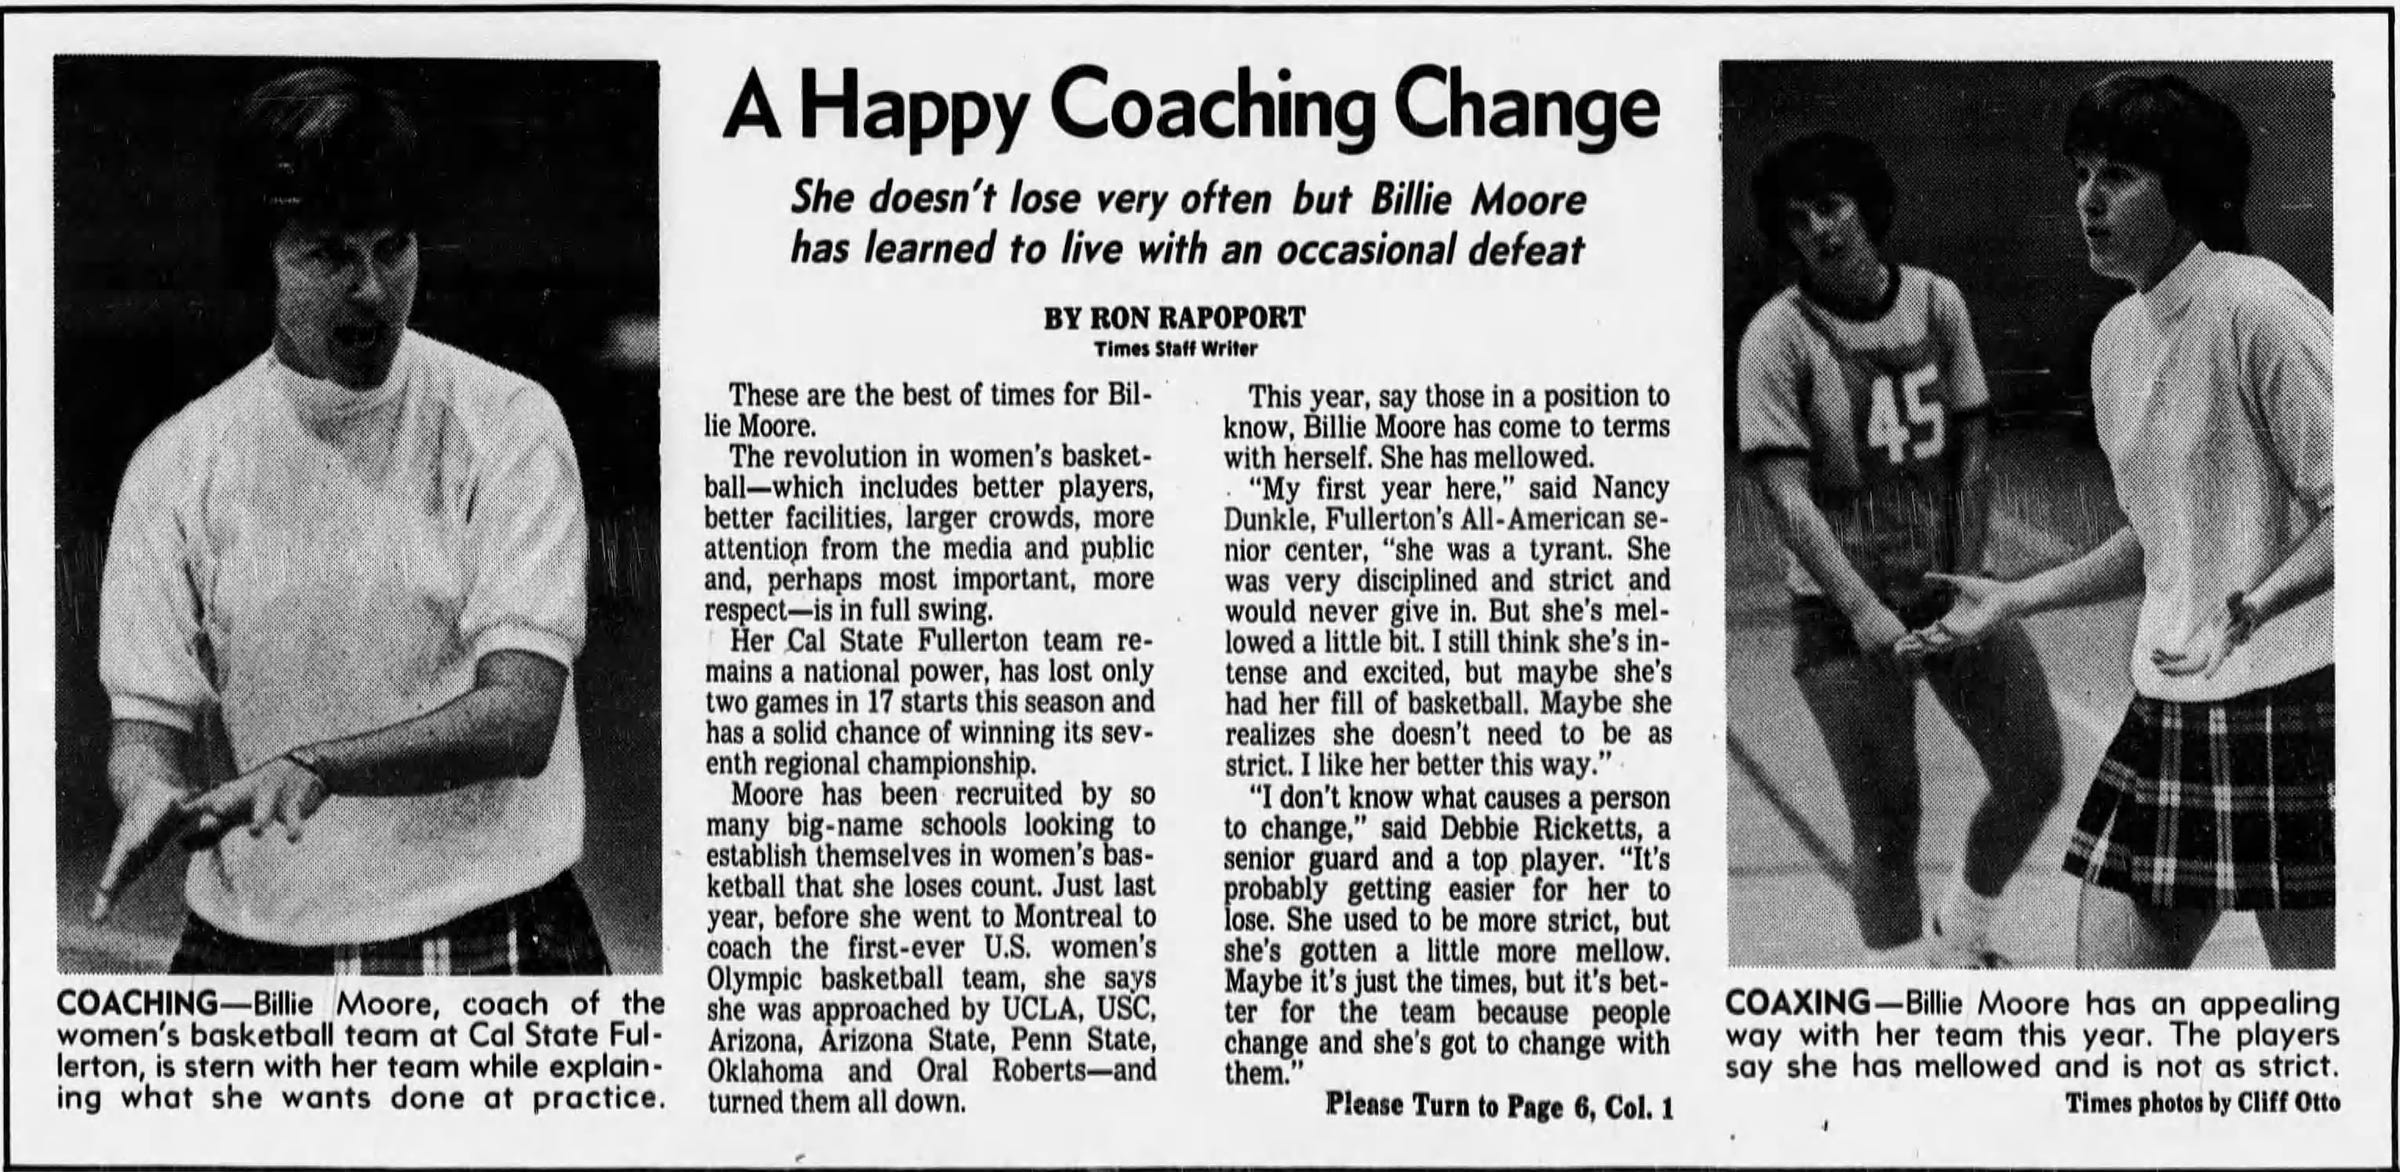 A Happy Coaching Change She doesn't lose very often but Billie Moore has learned to live with an occasional defeat BY RON RAPOPORT Times Staff Writer  These are the best of times for Billie Moore. The revolution in women's basketball which includes better players, better facilities, larger crowds, more attention from the media and public and, perhaps most important, more respect is in full swing.    Her Cal State Fullerton team remains a national power, has lost only two games in 17 starts this season and has a solid chance of winning its seventh regional championship. Moore has been recruited by so many big-name schools looking to establish themselves in women's basketball that she loses count. Just last year, before she went to Montreal to coach the first-ever U.S. women's Olympic basketball team, she says she was approached by UCLA, USC, Arizona, Arizona State, Penn State, Oklahoma and Oral Roberts and turned them all down.    This year, say those in a position to know, Billie Moore has come to terms with herself. She has mellowed. "My first year here," said Nancy Dunkle, Fullerton's AU-American senior center, "she was a tyrant. She was very disciplined and strict and would never give in. But she's mellowed a little bit. I still think she's intense and excited, but maybe she's had her fill of basketball. Maybe she realizes she doesn't need to be as strict. I like her better this way." "I don't know what causes a person to change," said Debbie Ricketts, a senior guard and a top player. "It's probably getting easier for her to lose. She used to be more strict, but she's gotten a little more mellow. Maybe it's just the times, but it's better for the team because people change and she's got to change with them."